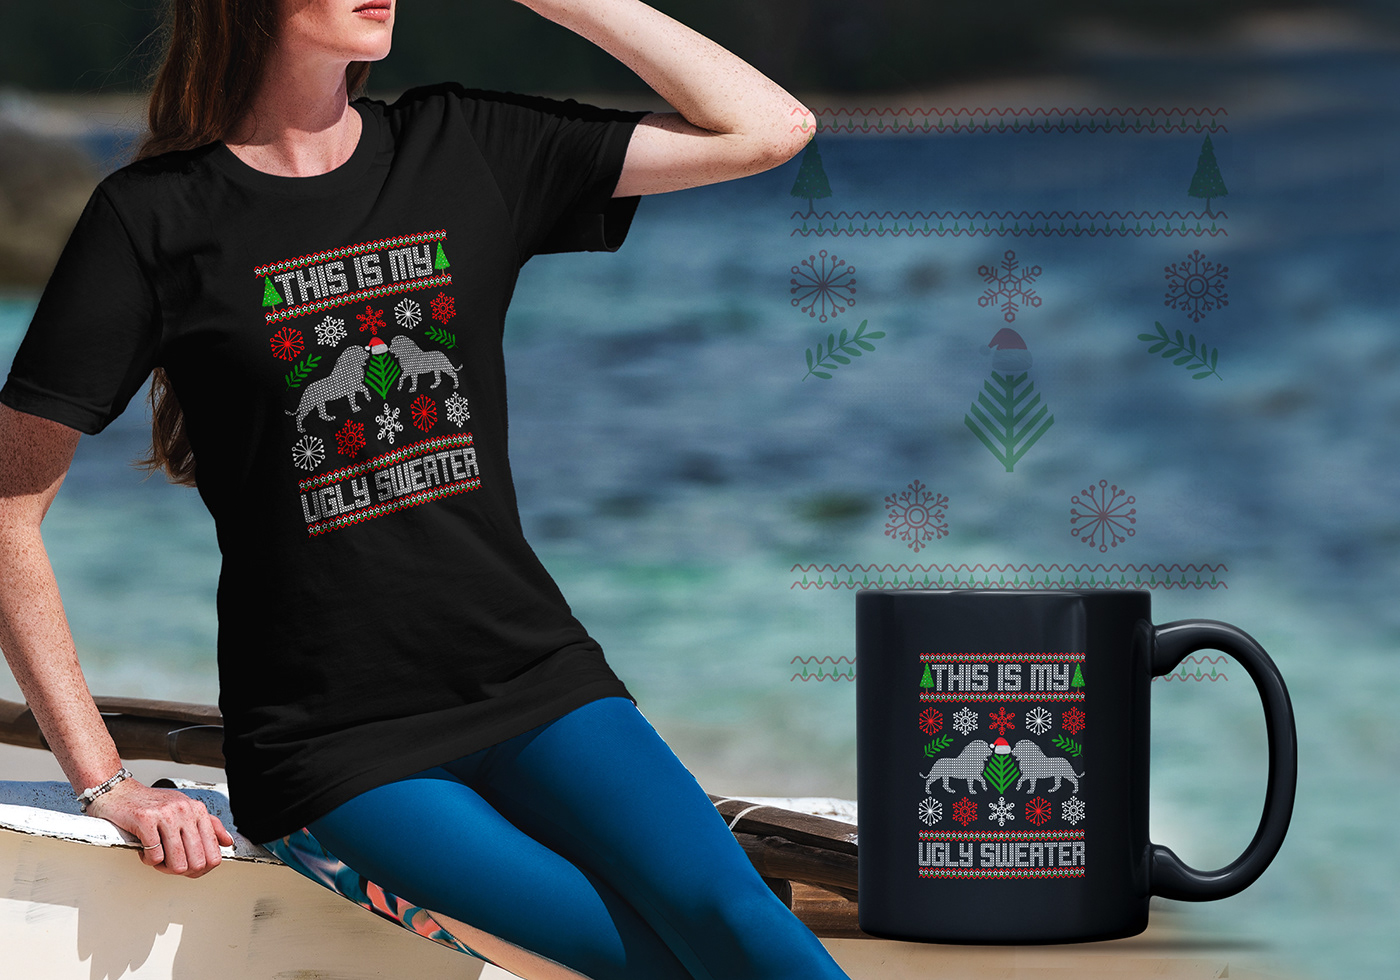 This is my ugly sweater - funny Typography Vector T-shirt Design